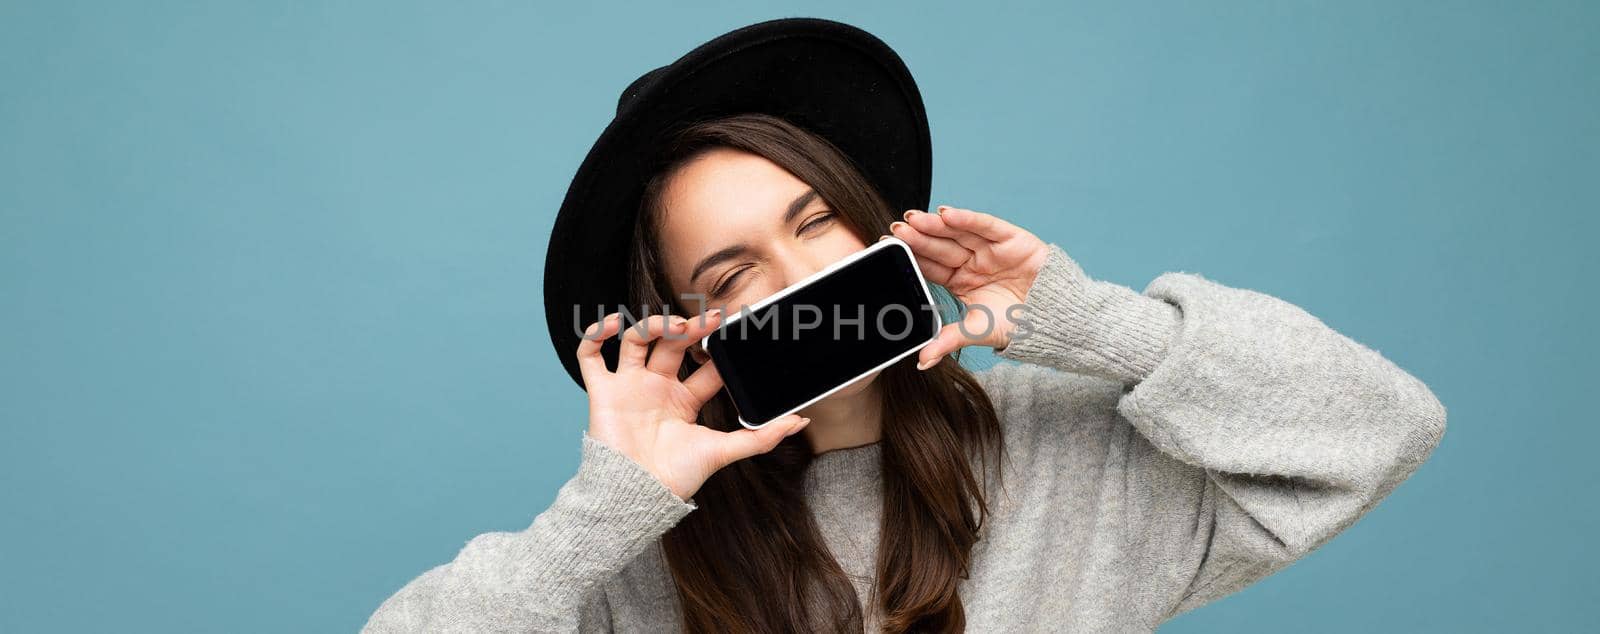 panoramic Photo of Beautiful positive woman person wearing black hat and grey sweater holding mobilephone showing smartphone isolated on background with fantastic eyes by TRMK